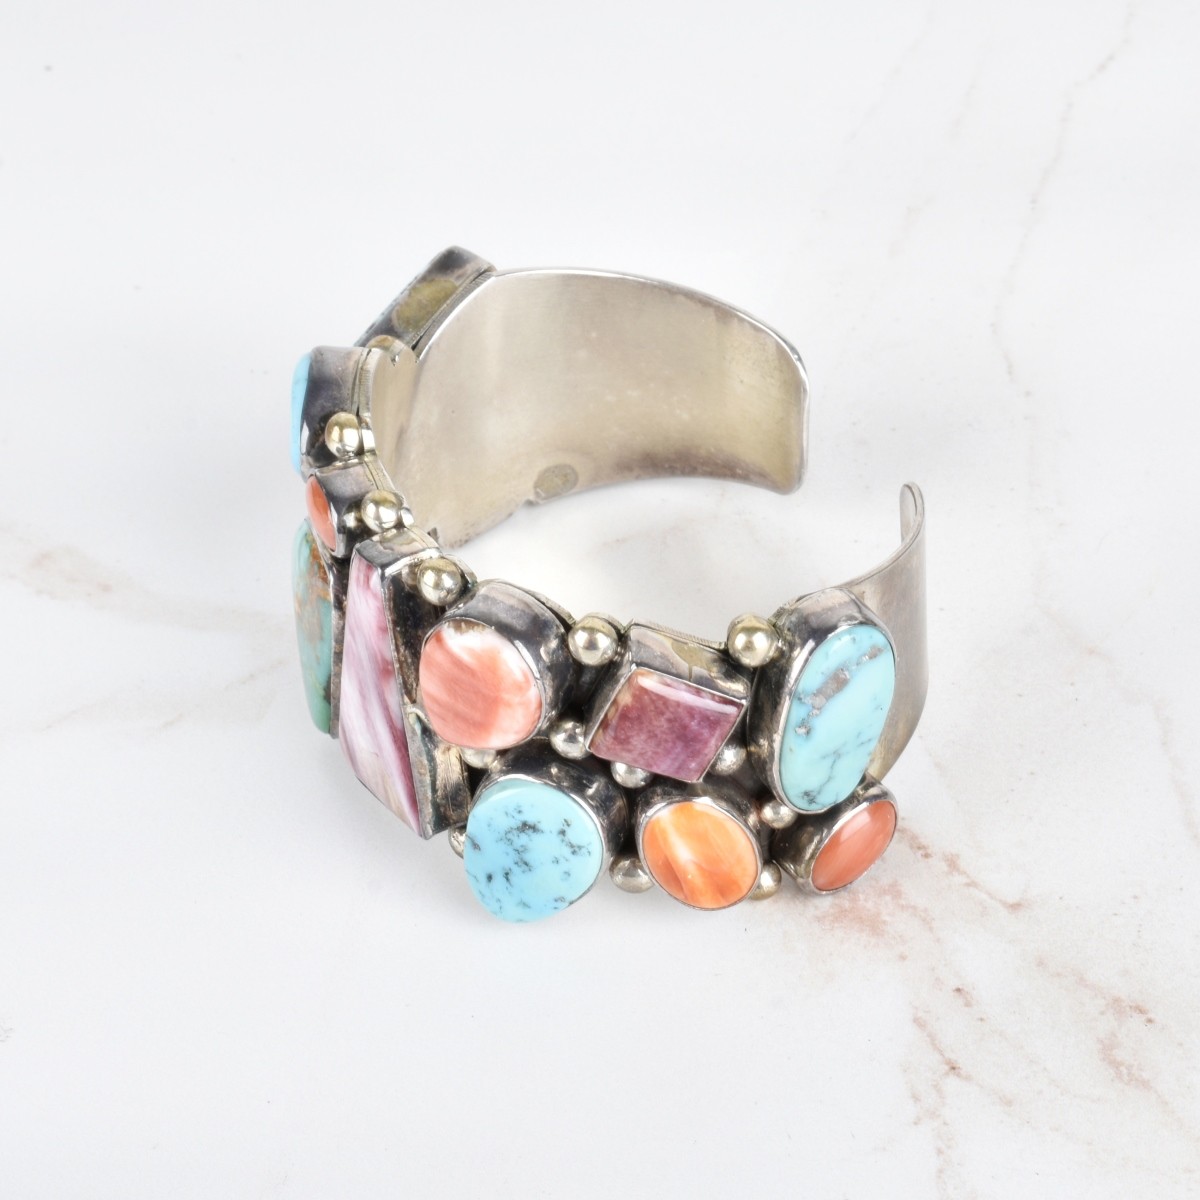 Turquoise, Hardstone and Silver Cuff Bangle